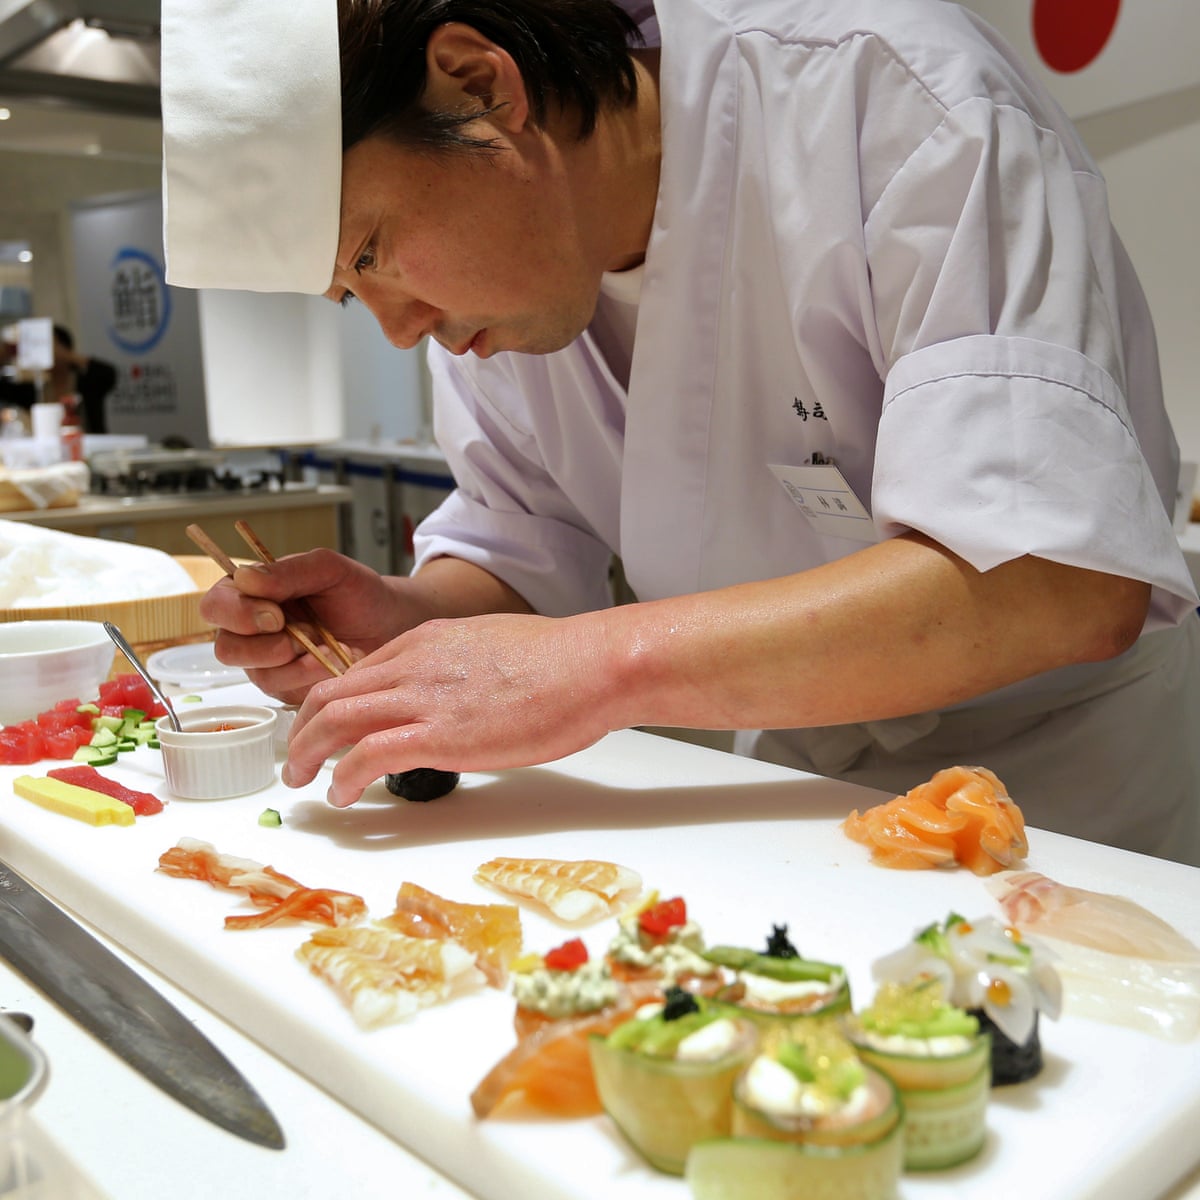 No cream cheese, chatting or gloves: inside the Global Sushi Challenge, Japanese food and drink